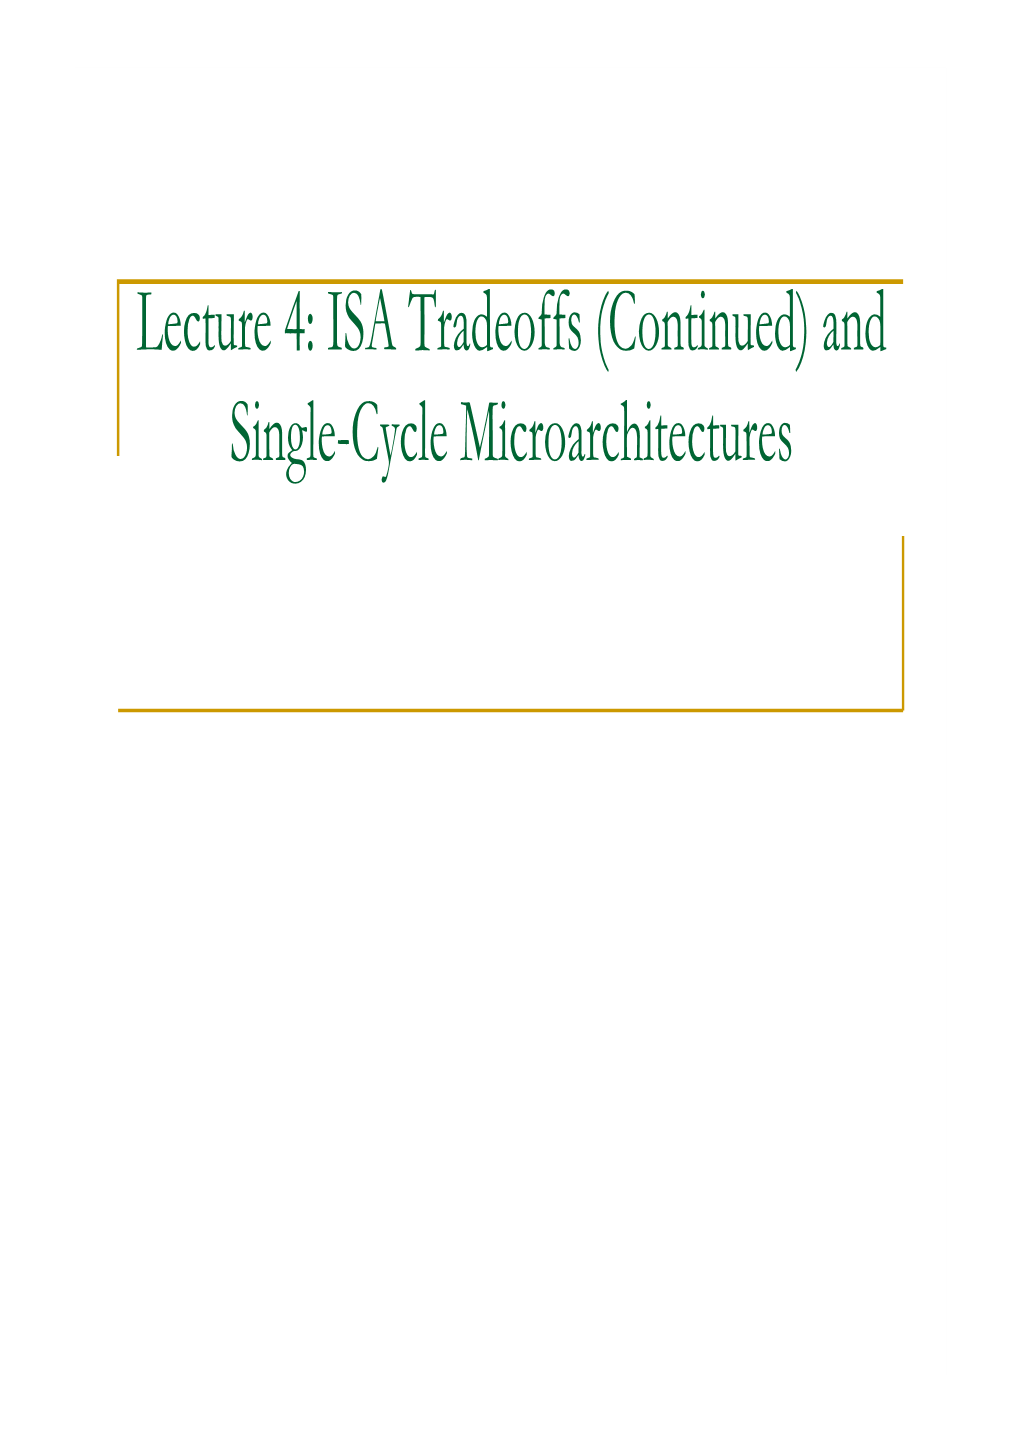 Lecture 4: ISA Tradeoffs (Continued) and Single-Cycle Microarchitectures ISA-Level Tradeoffs: Instruction Length